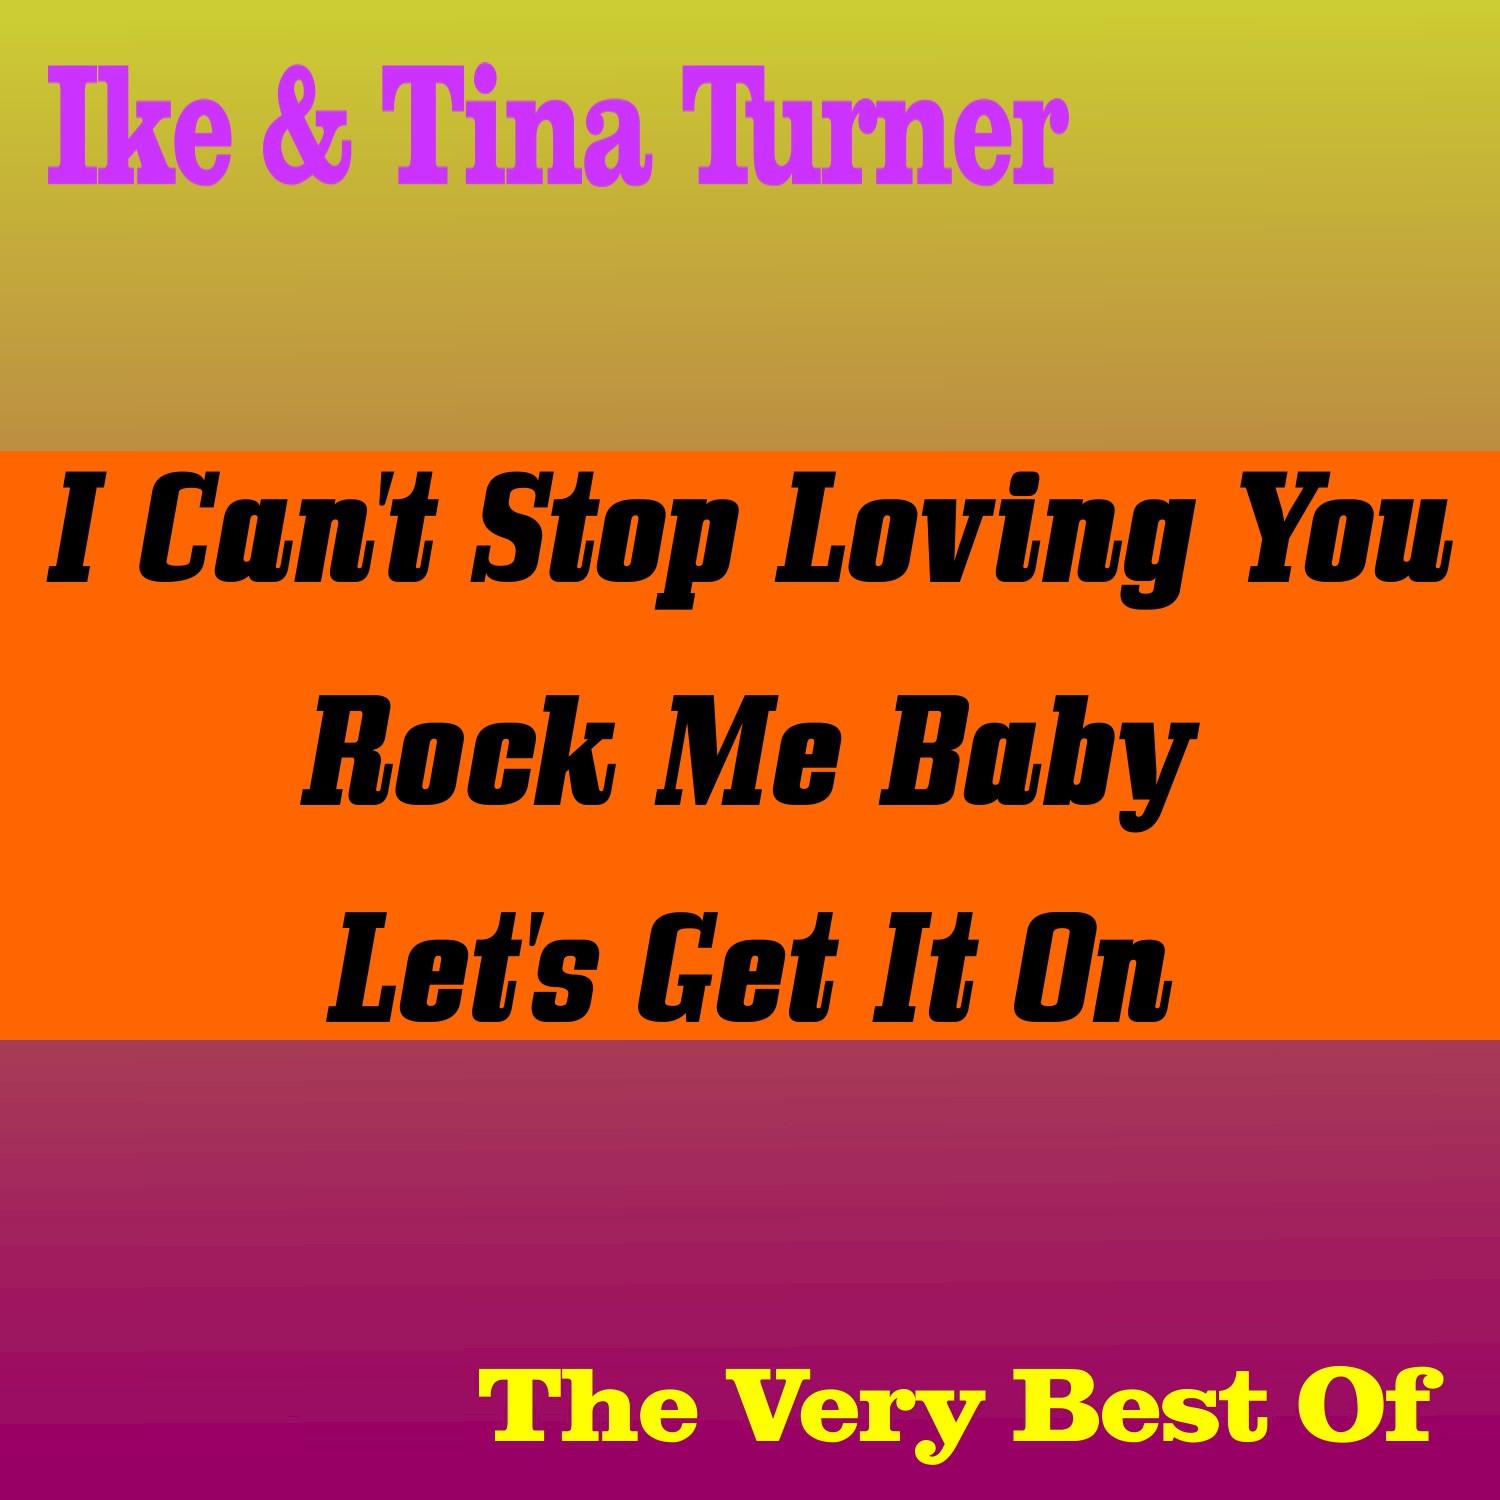 Ike & Tina Turner - The Very Best Of